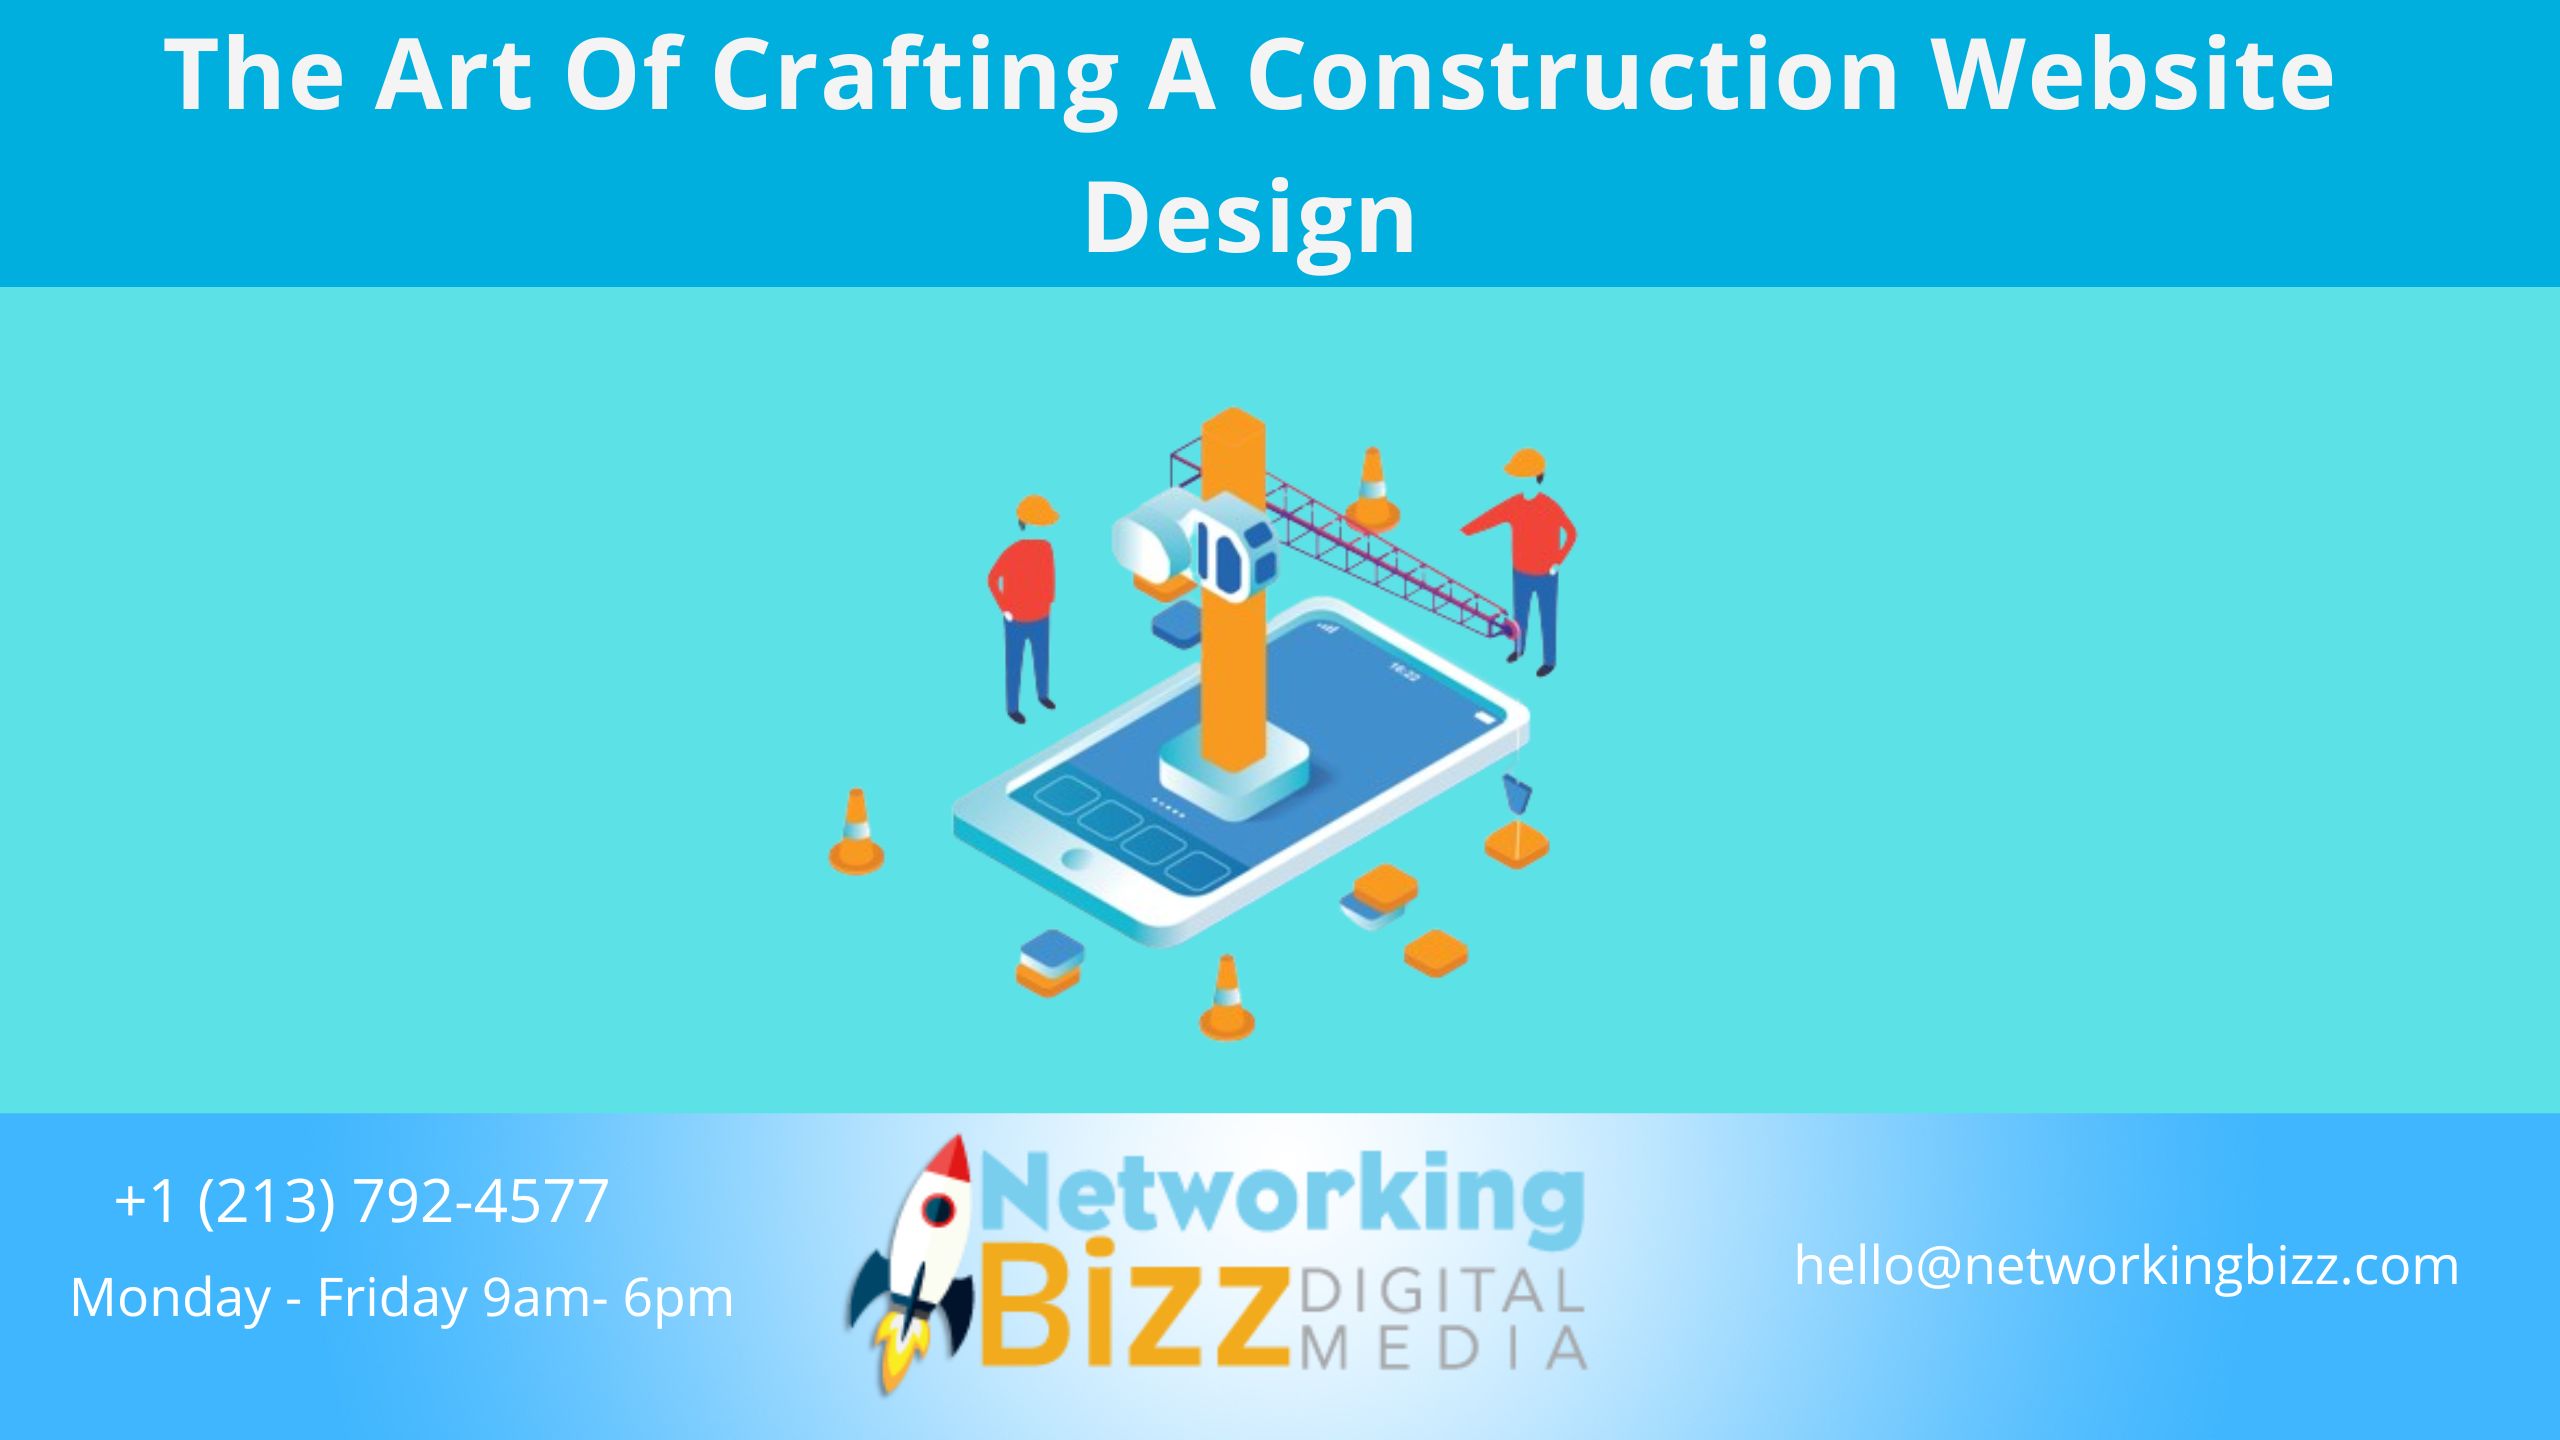 The Art Of Crafting A Construction Website Design